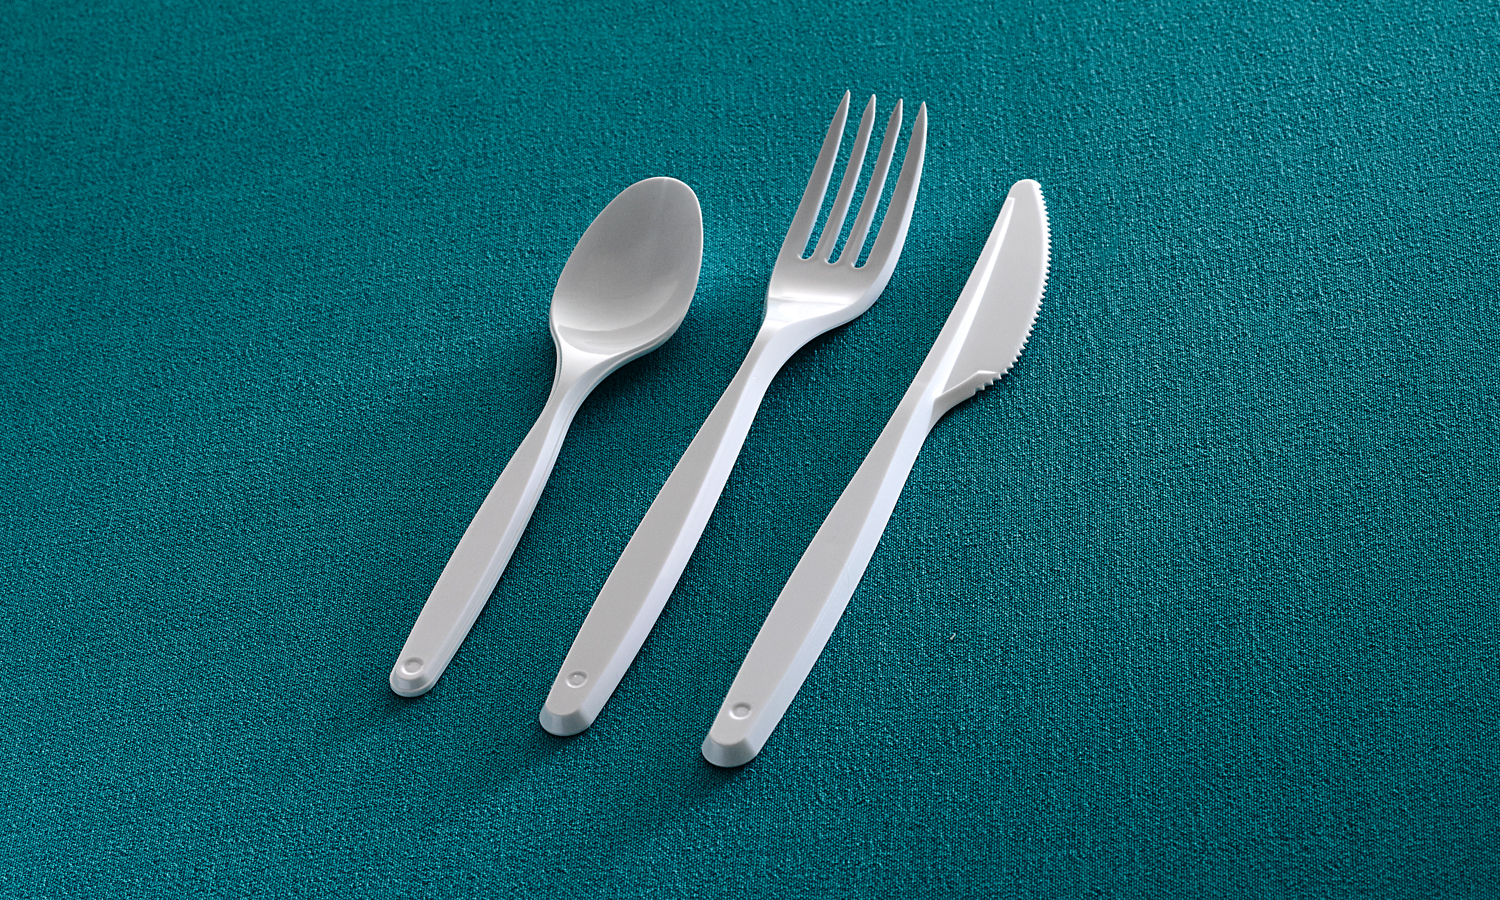 Clean Touch Color Cutlery